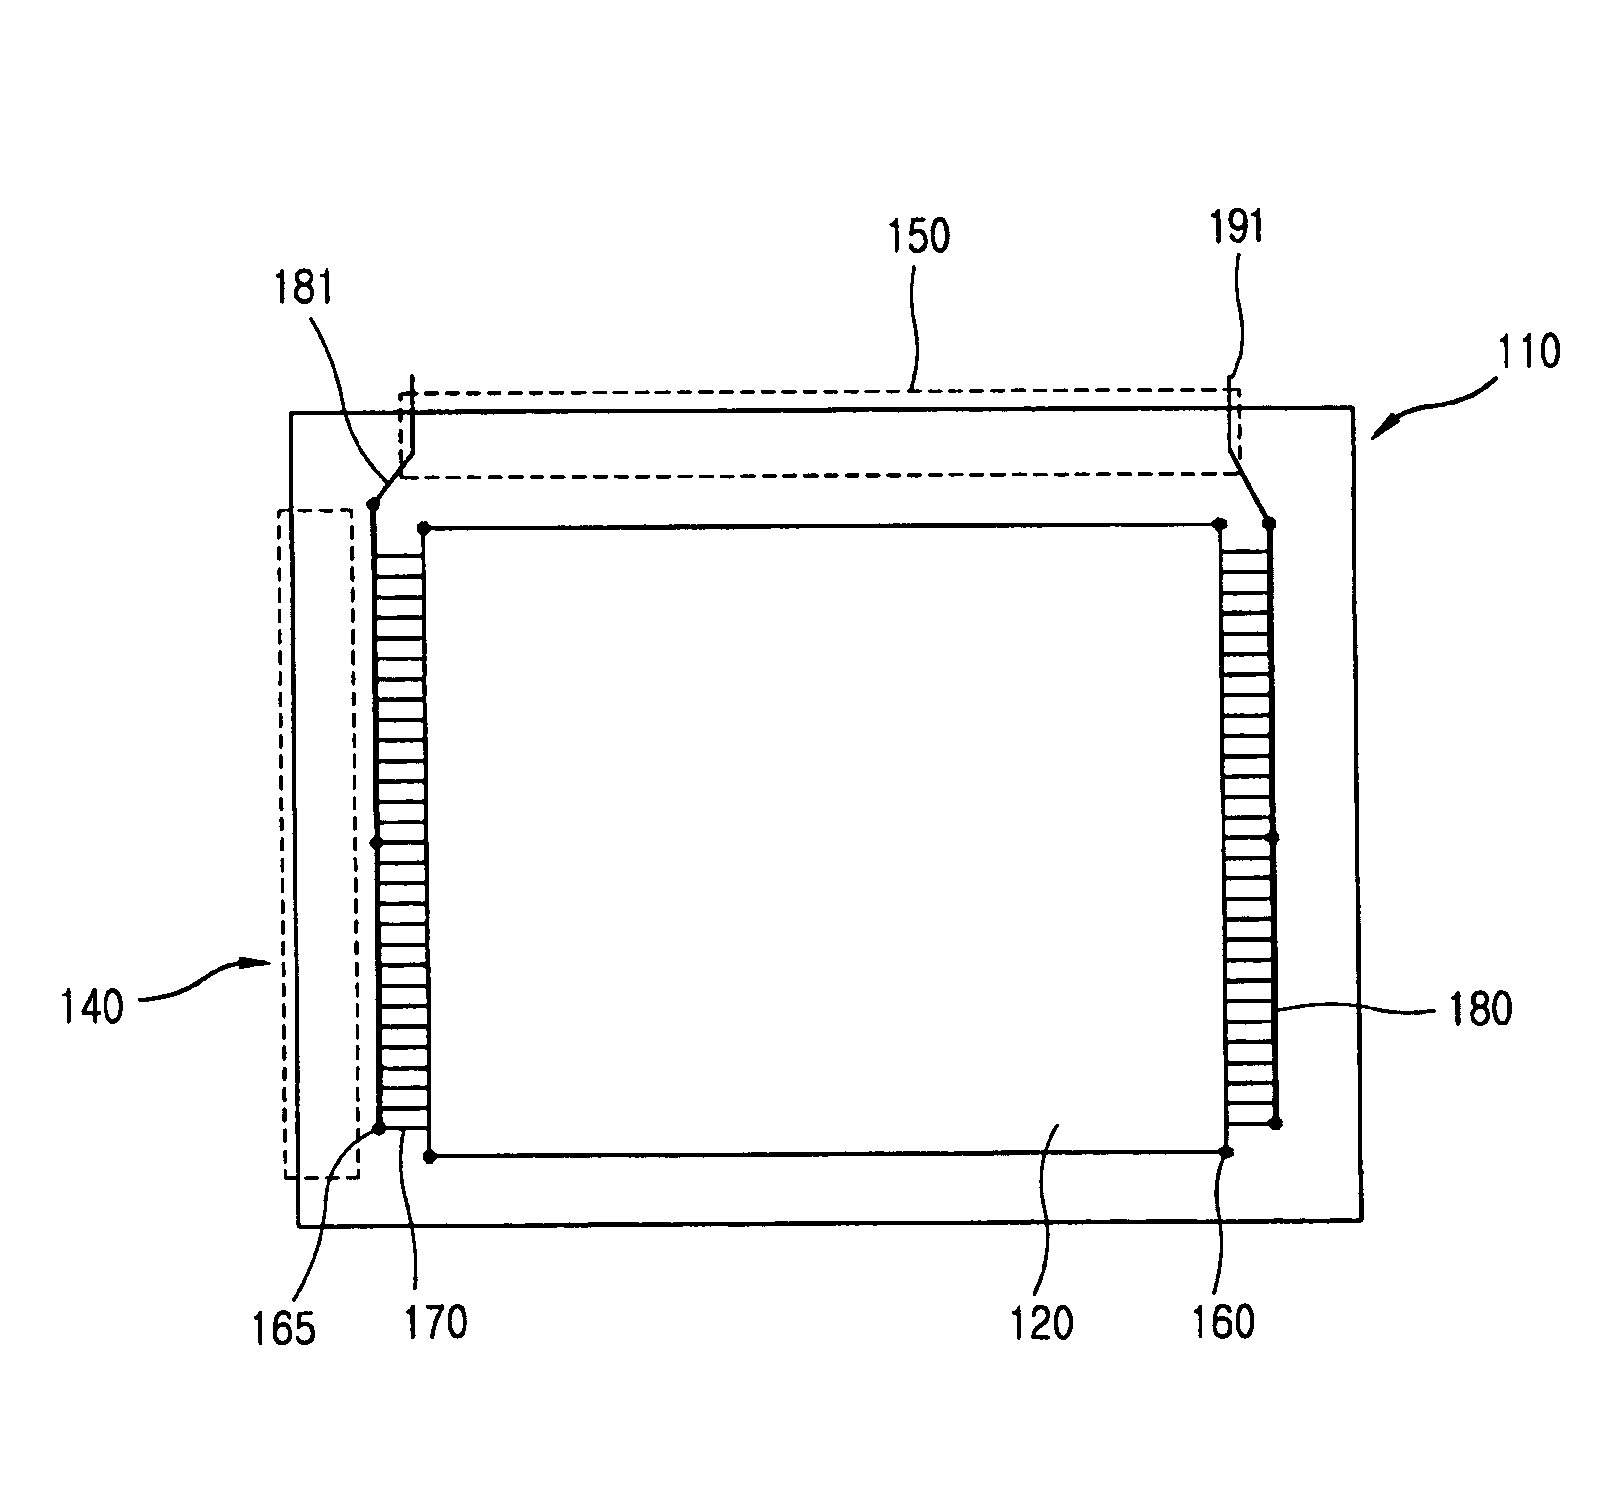 Liquid crystal display panel with reduced parasitic impedance